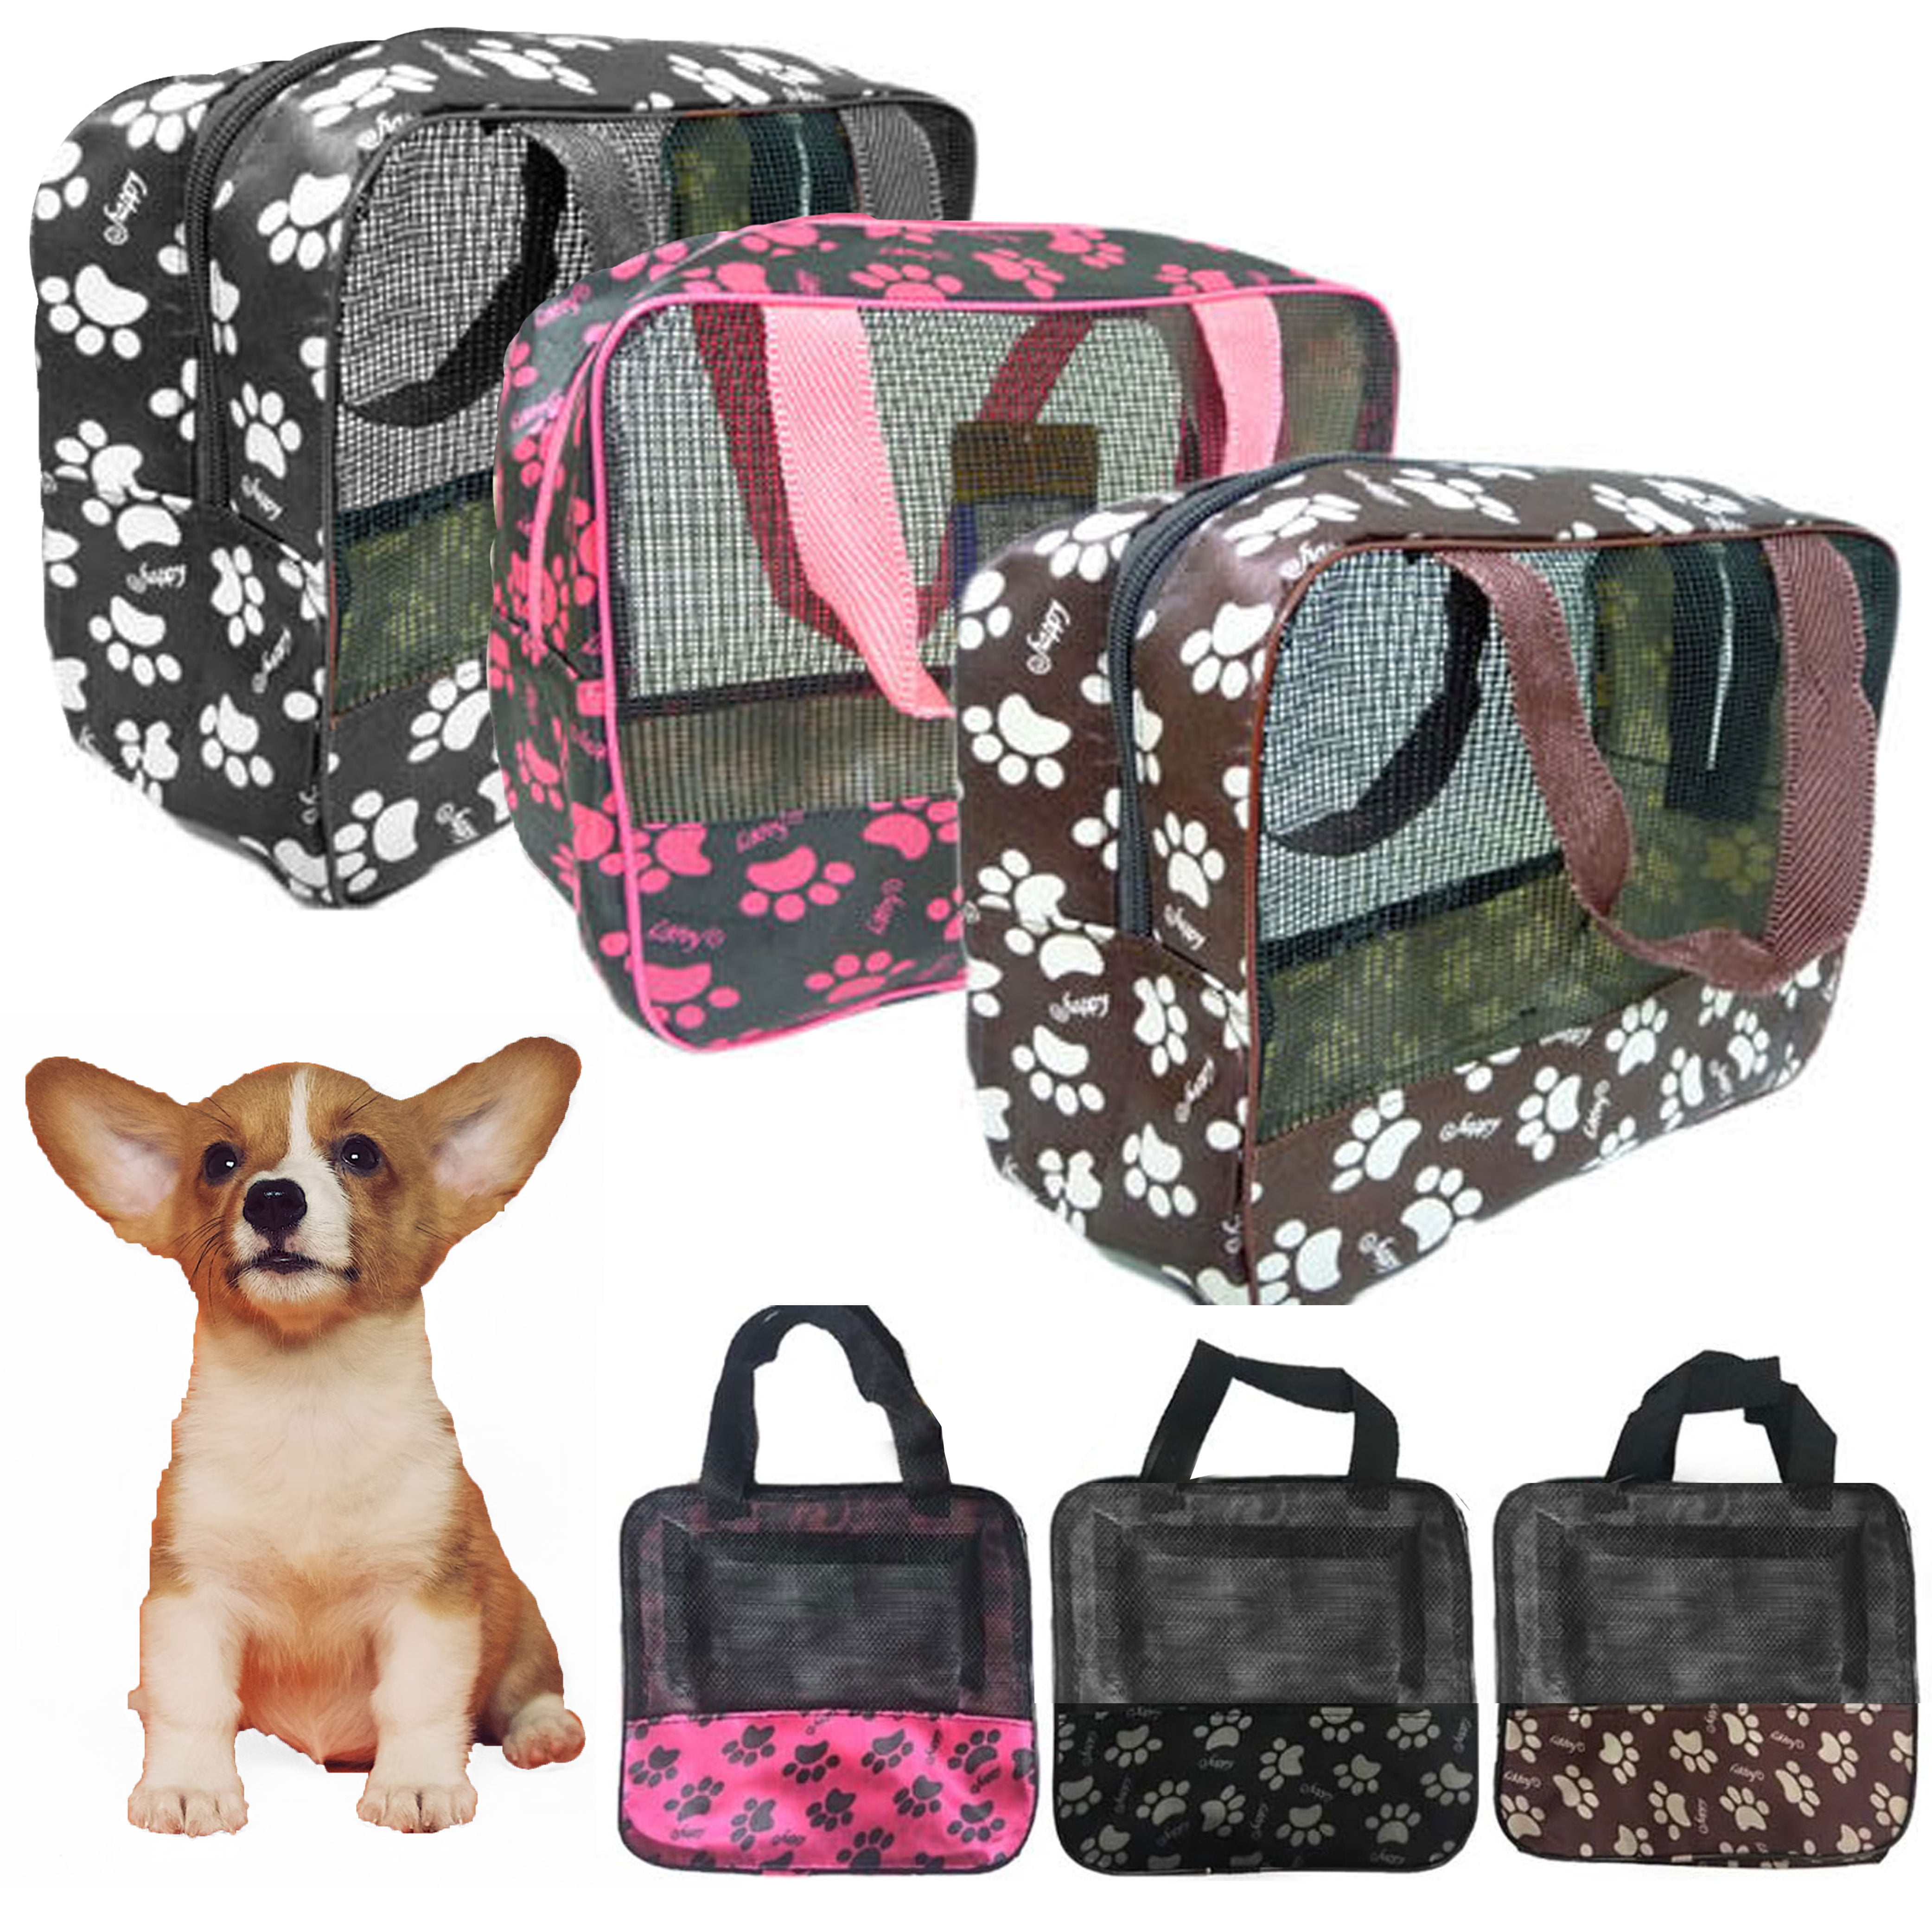 2 Pc Pet Portable Carrier Bag Small Dog Puppy Cat Soft Comfortable Travel  Tote